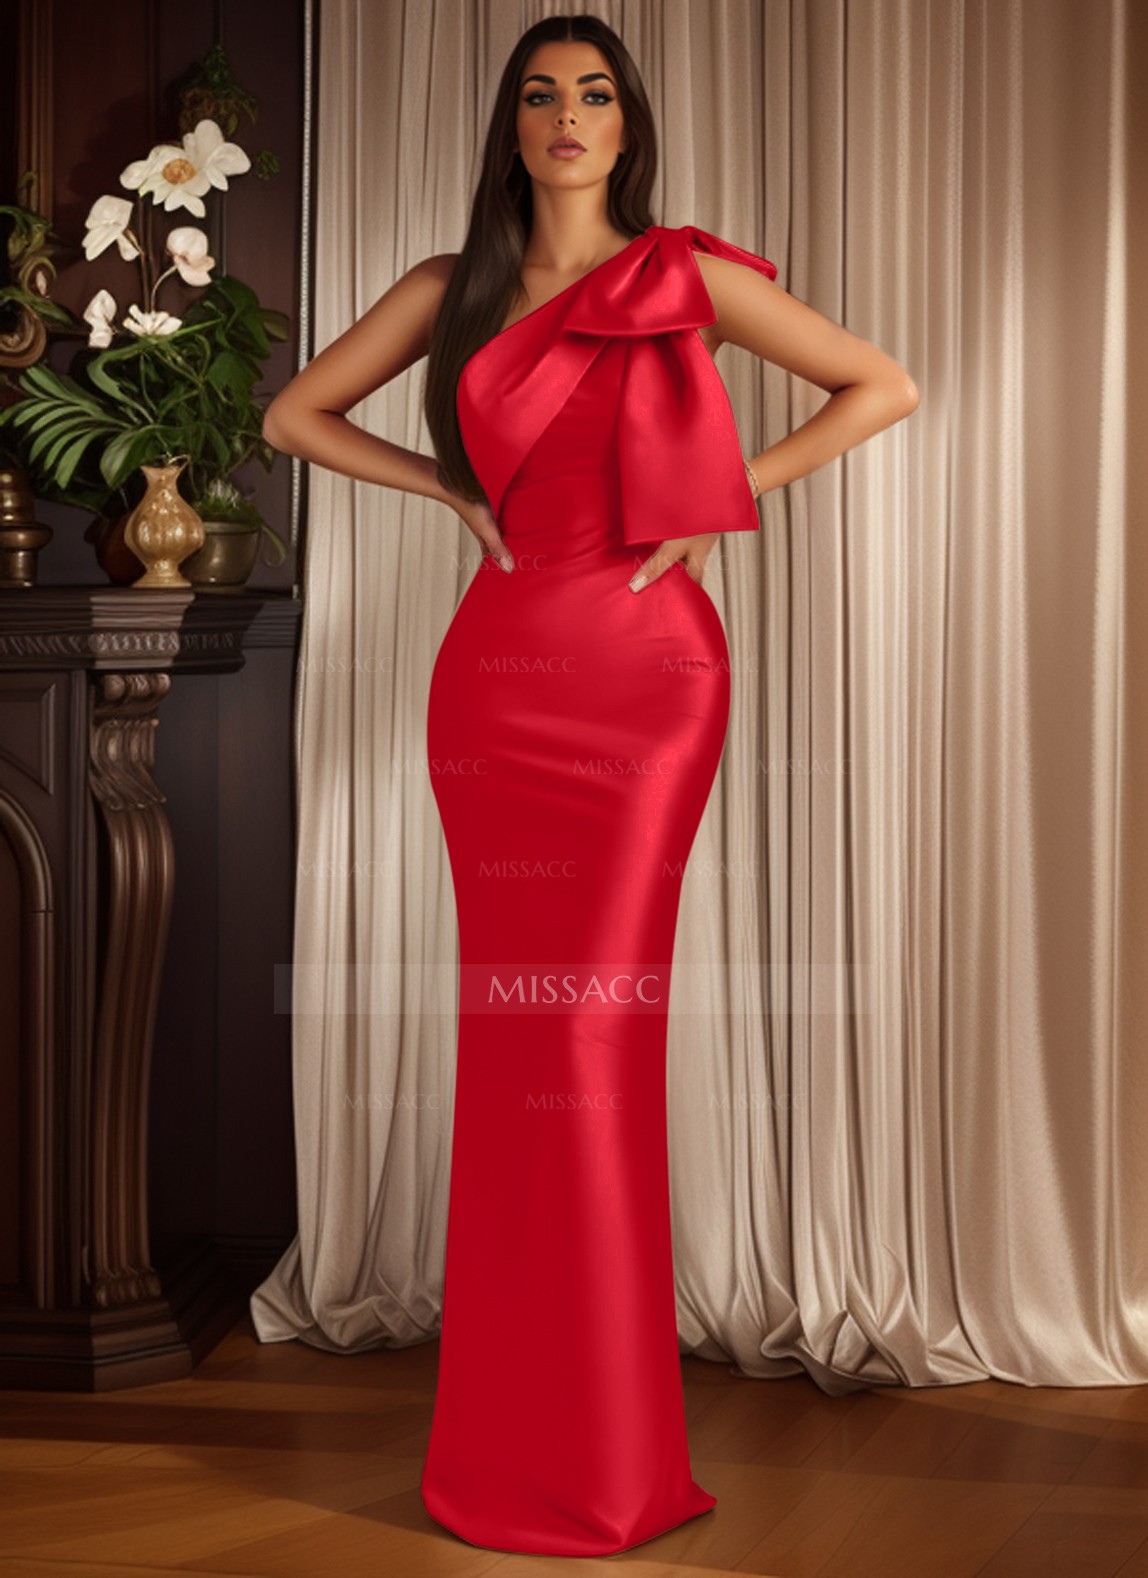 Sheath/Column One-Shoulder Sleeveless Satin Prom Dresses With Bow(s)